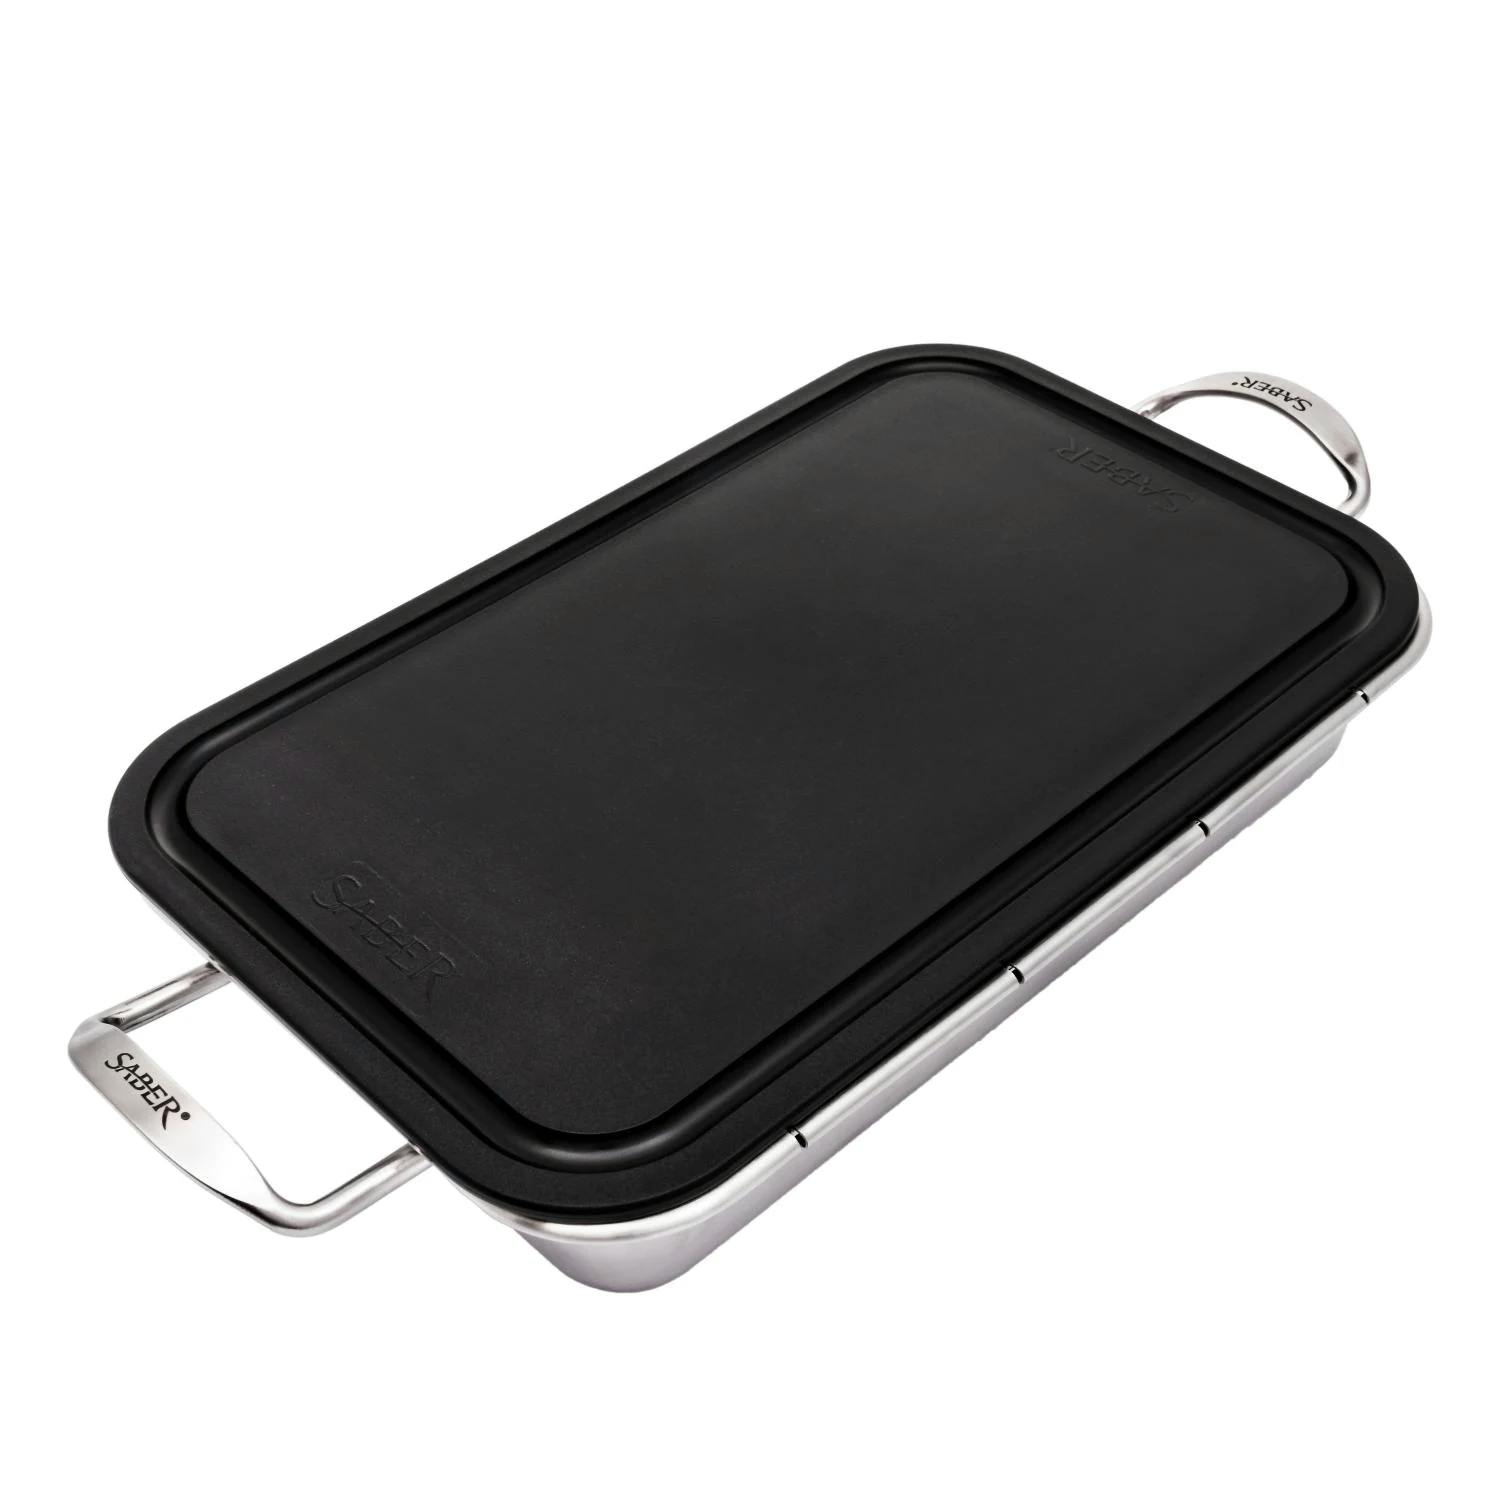 Saber Stainless Steel Roasting Pan with Cutting Board